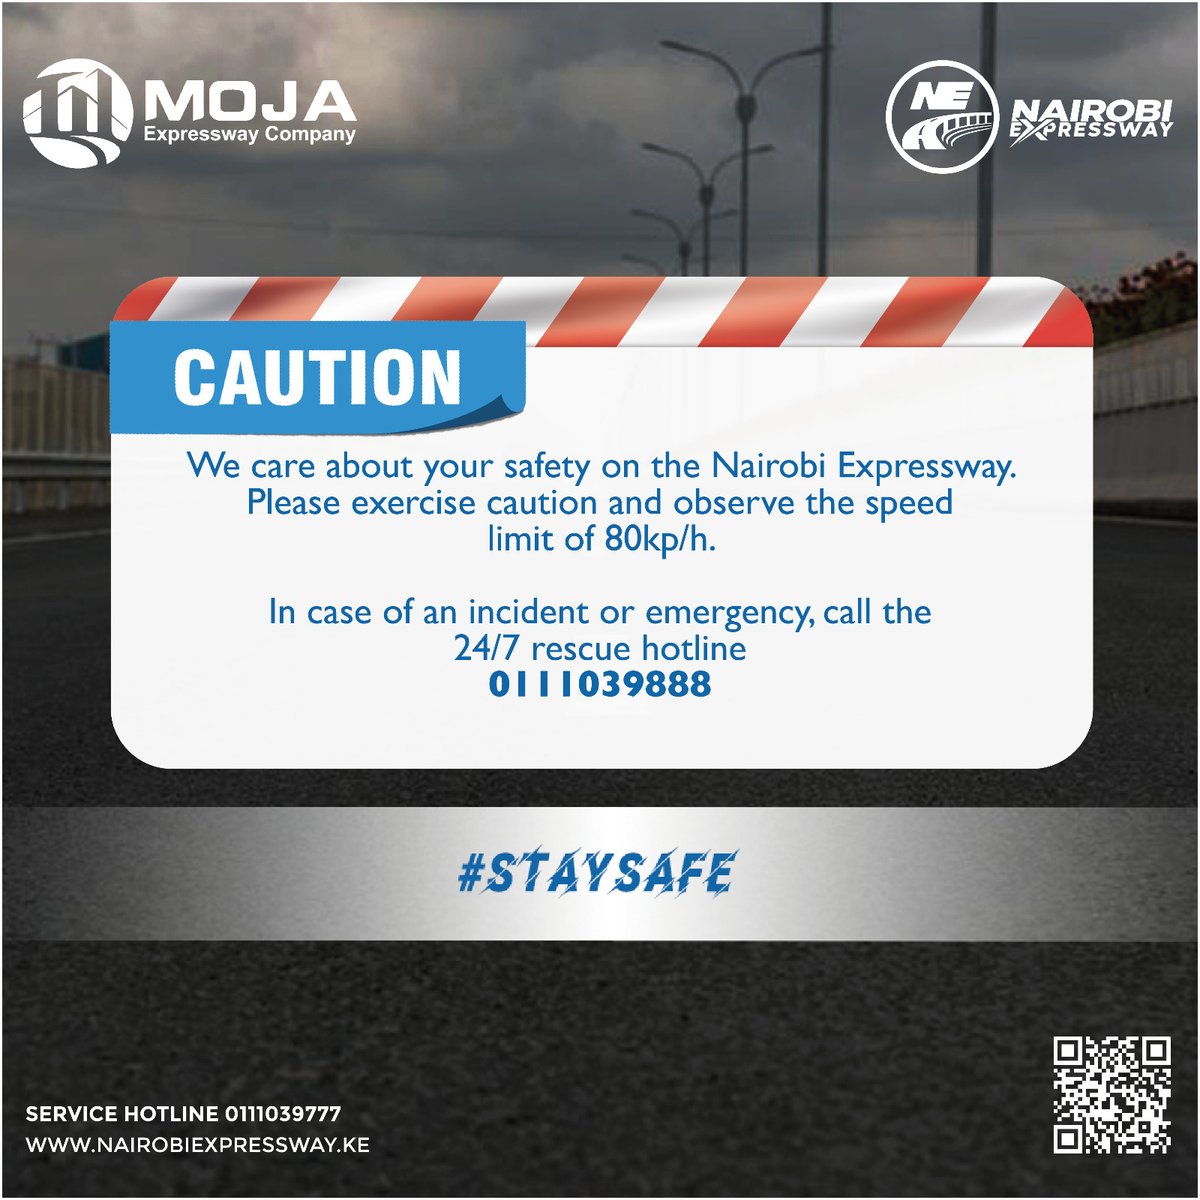 Because safety is our top priority, ensure to observe the speed limit while driving on the Nairobi Expressway and call the rescue hotline in case of an emergency. #NairobiExpressway #TrafficUpdates #Expressway #Safety